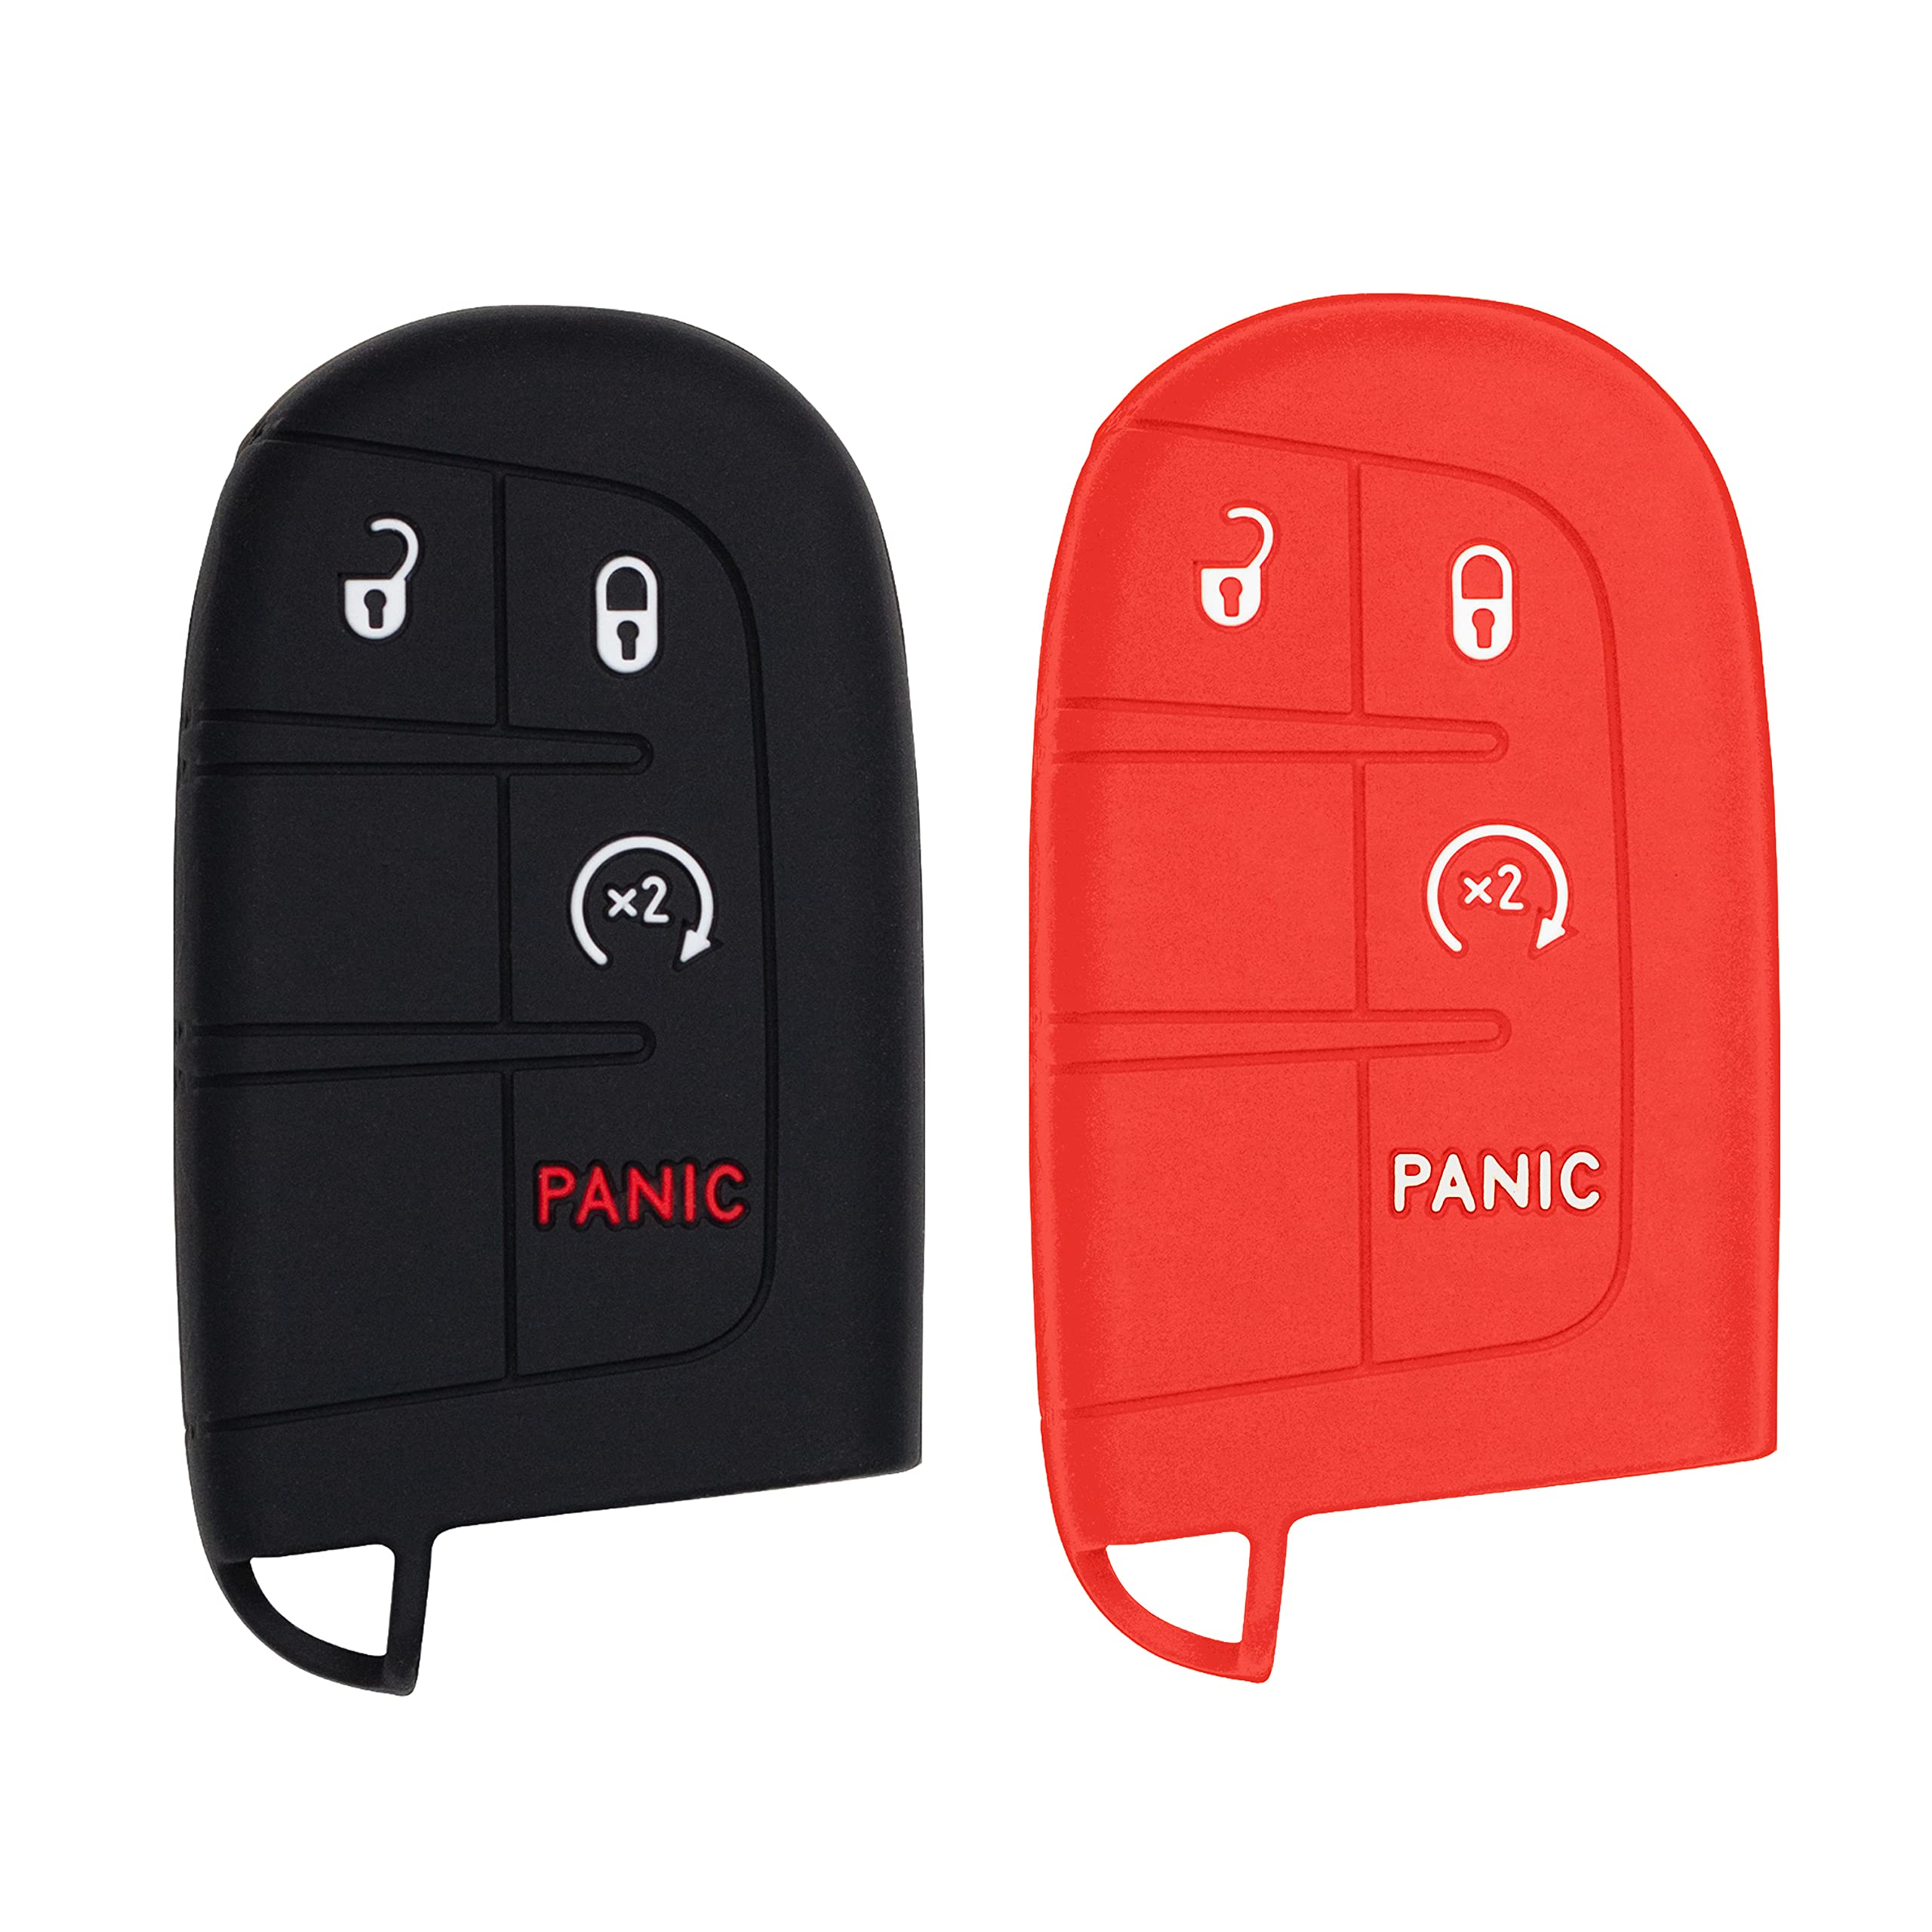 Silicone Case for Keyless Entry Smart Key fob for Jeep Renegade Grand Cherokee Compass Journey Durango Charger 300 200 Cherokee (Double, Black & Red)